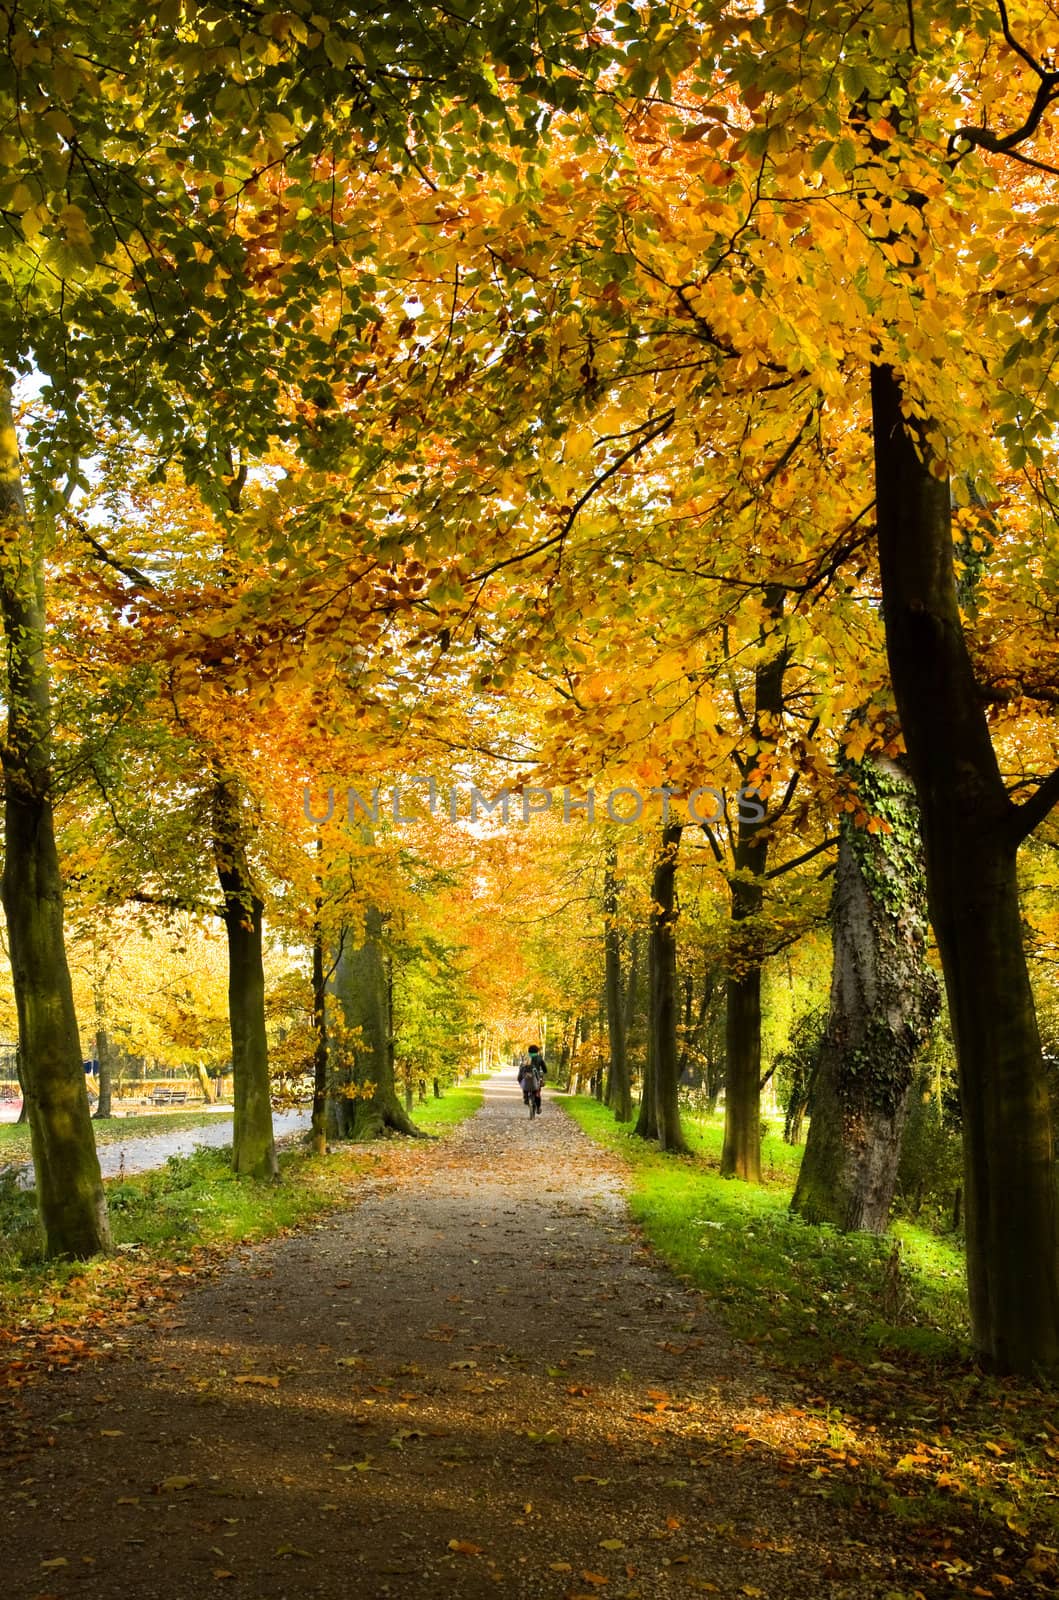 Lane in park with beech trees in fall colors by Colette